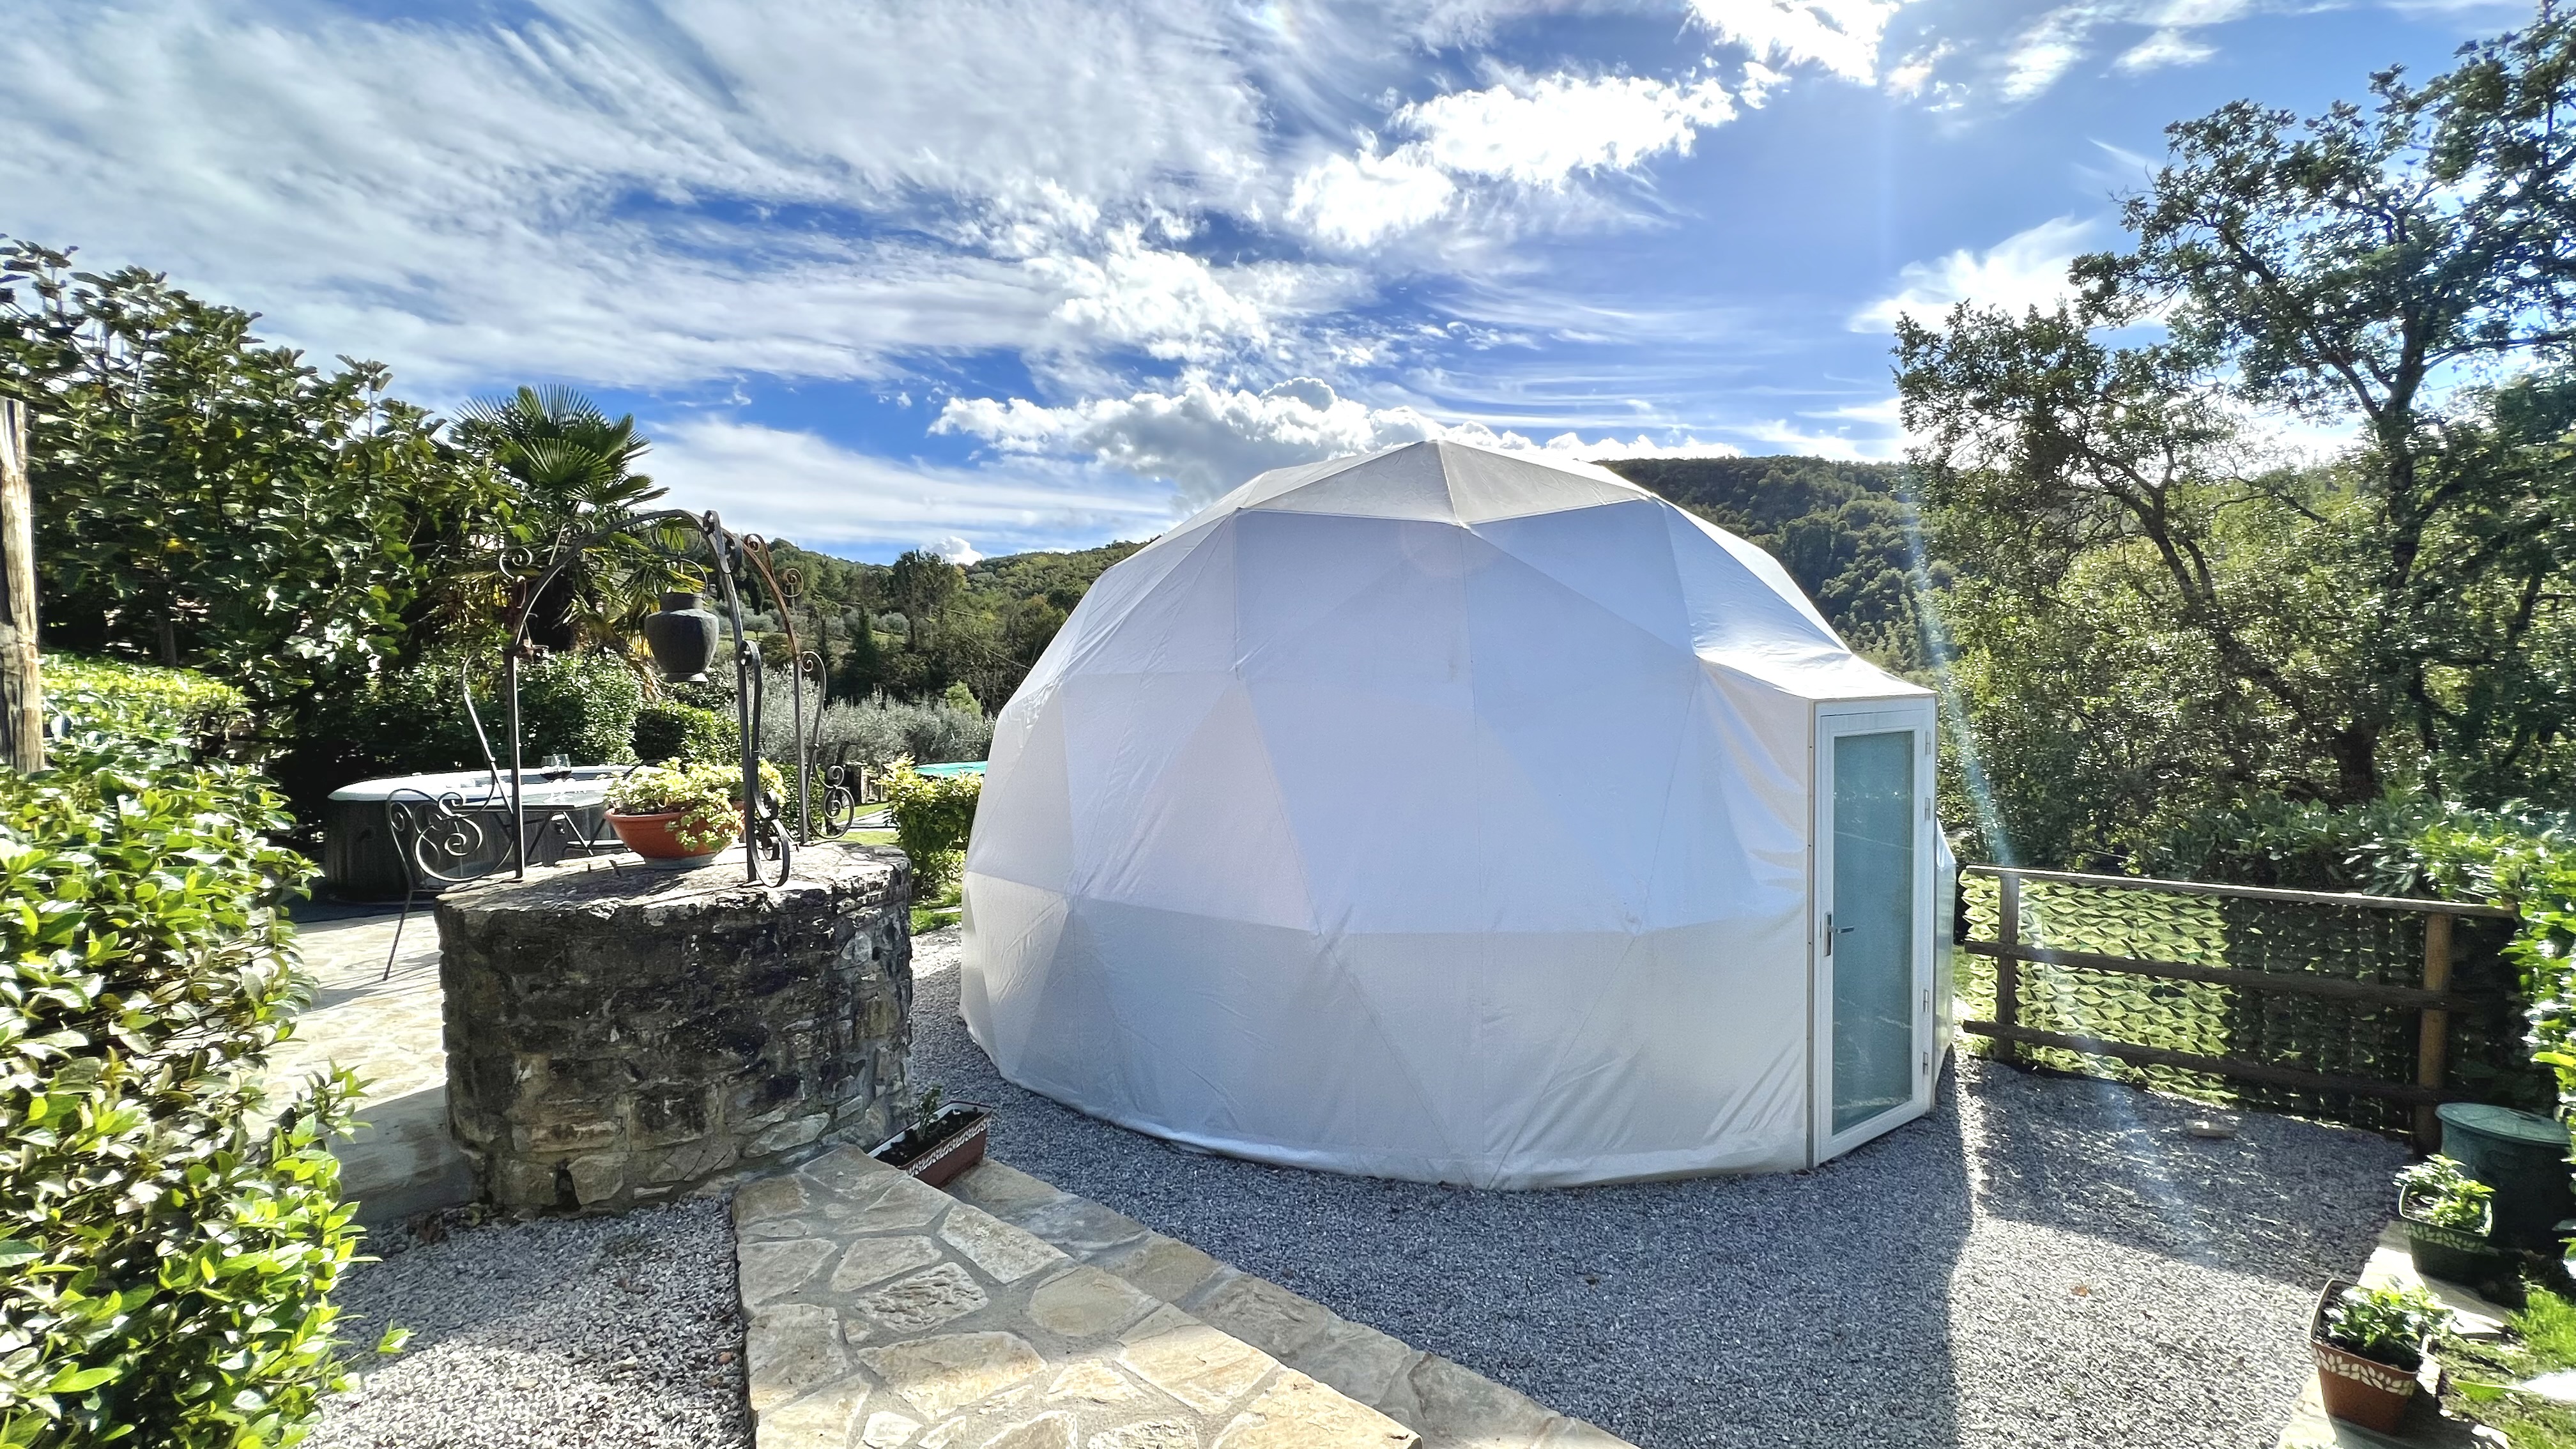 Glamping in cupola geodetica in Umbria